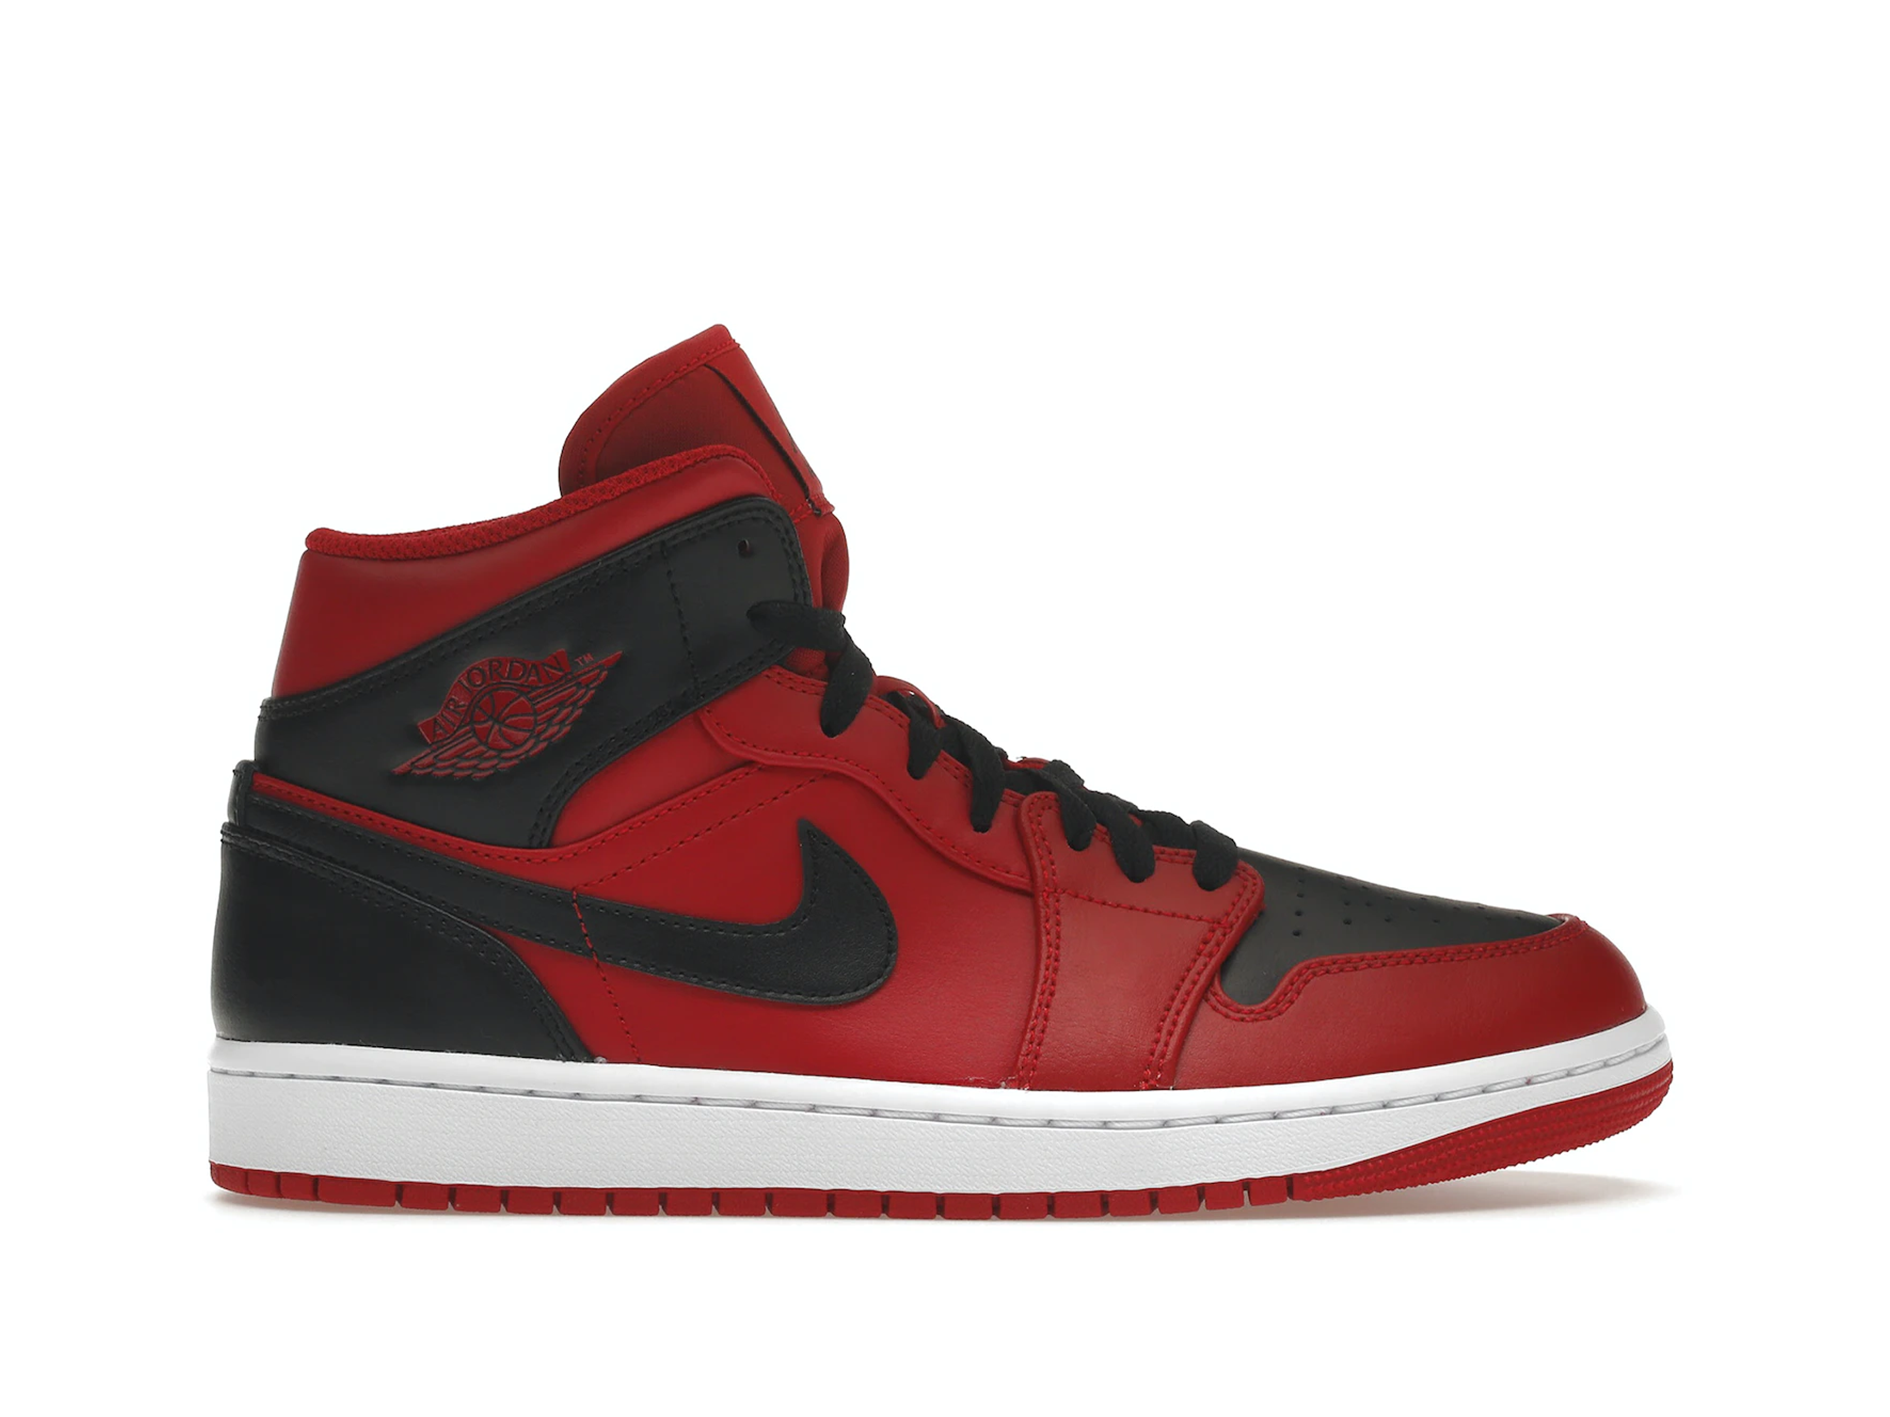 Double Boxed  199.99 Nike Air Jordan 1 Mid Reverse Bred Double Boxed